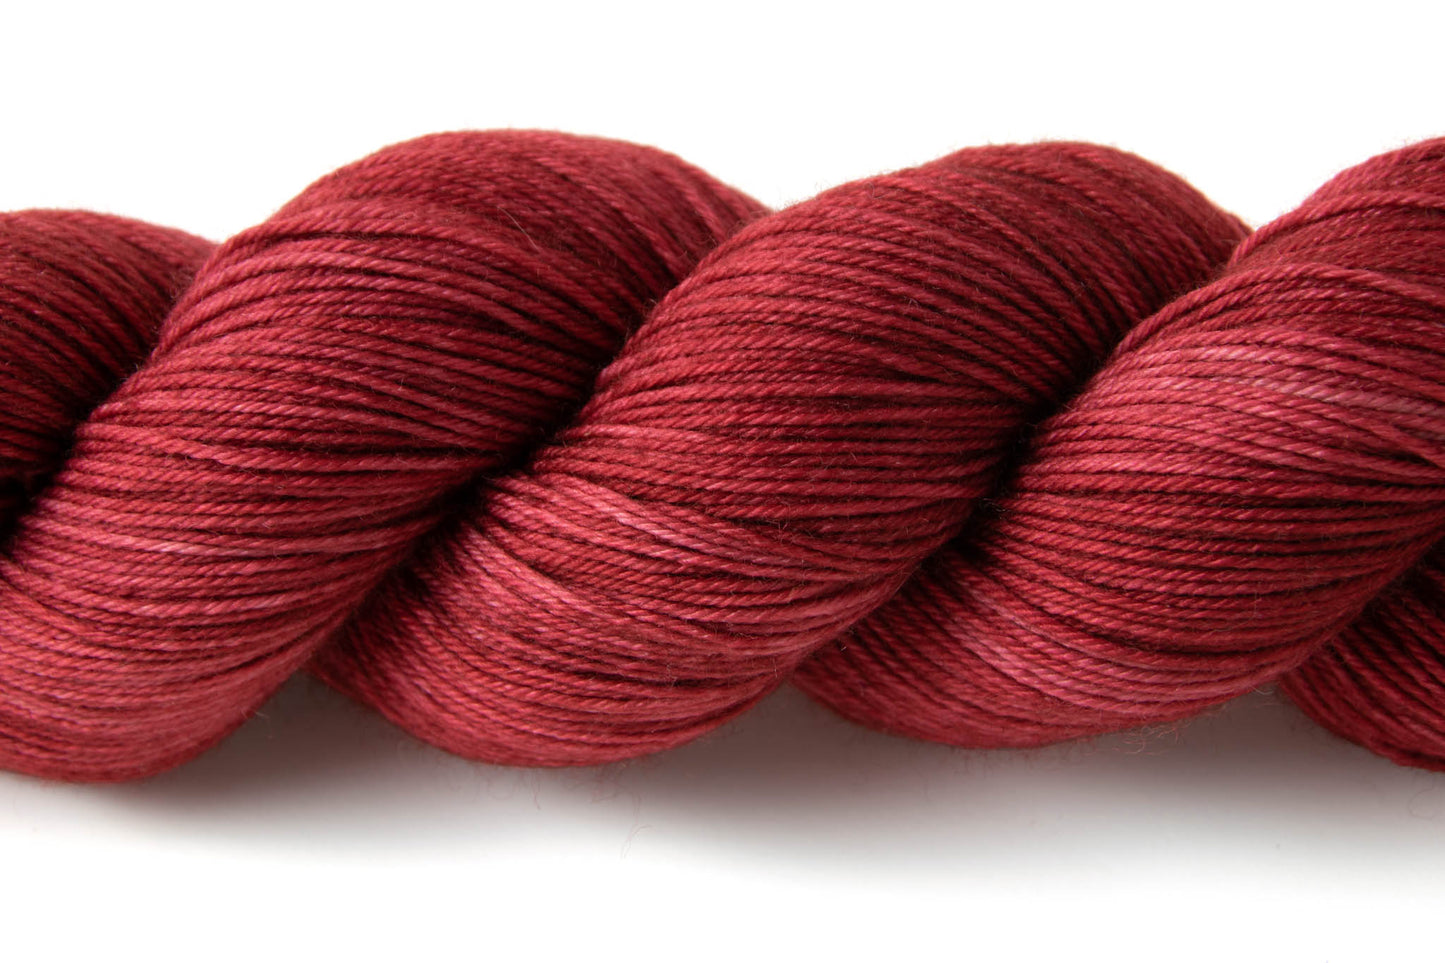 Closeup on the tonal qualities of the yarn: deep red patches with lighter, almost pink highlight throughout.